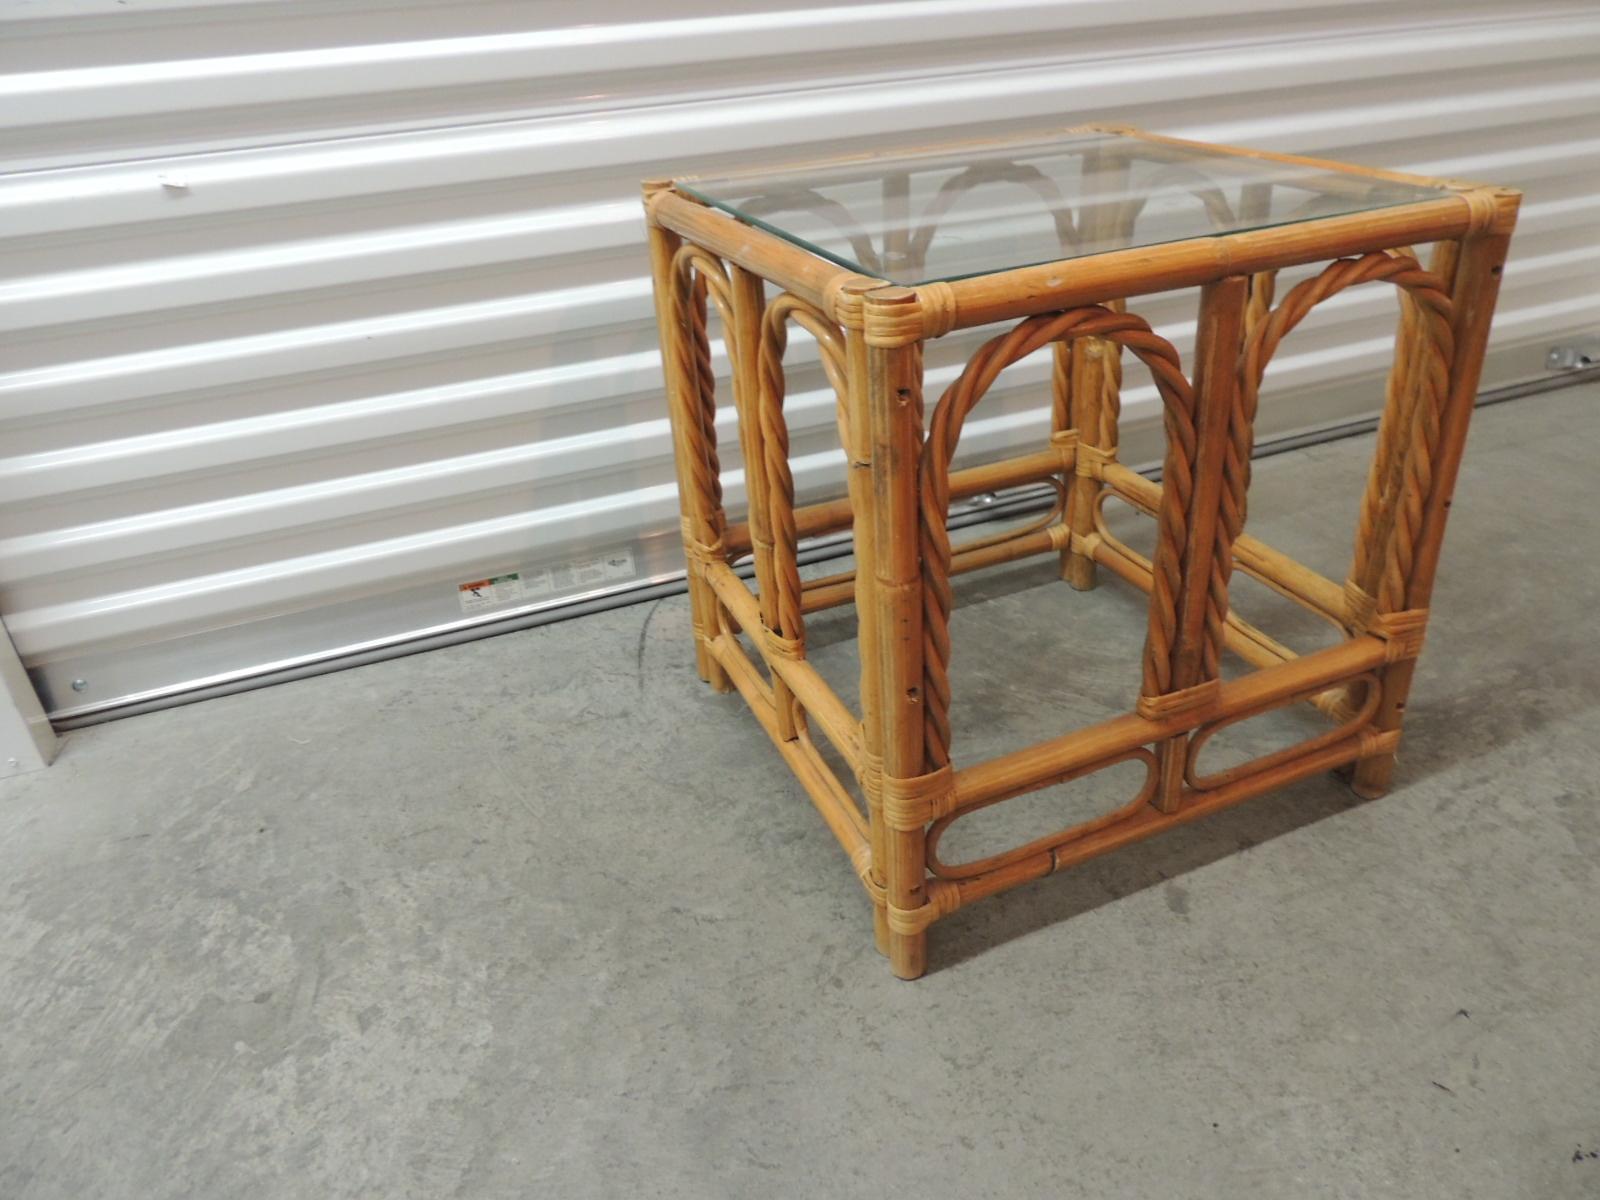 Vintage bamboo and rattan side table with glass top.
Square side table.
Size: 20.5